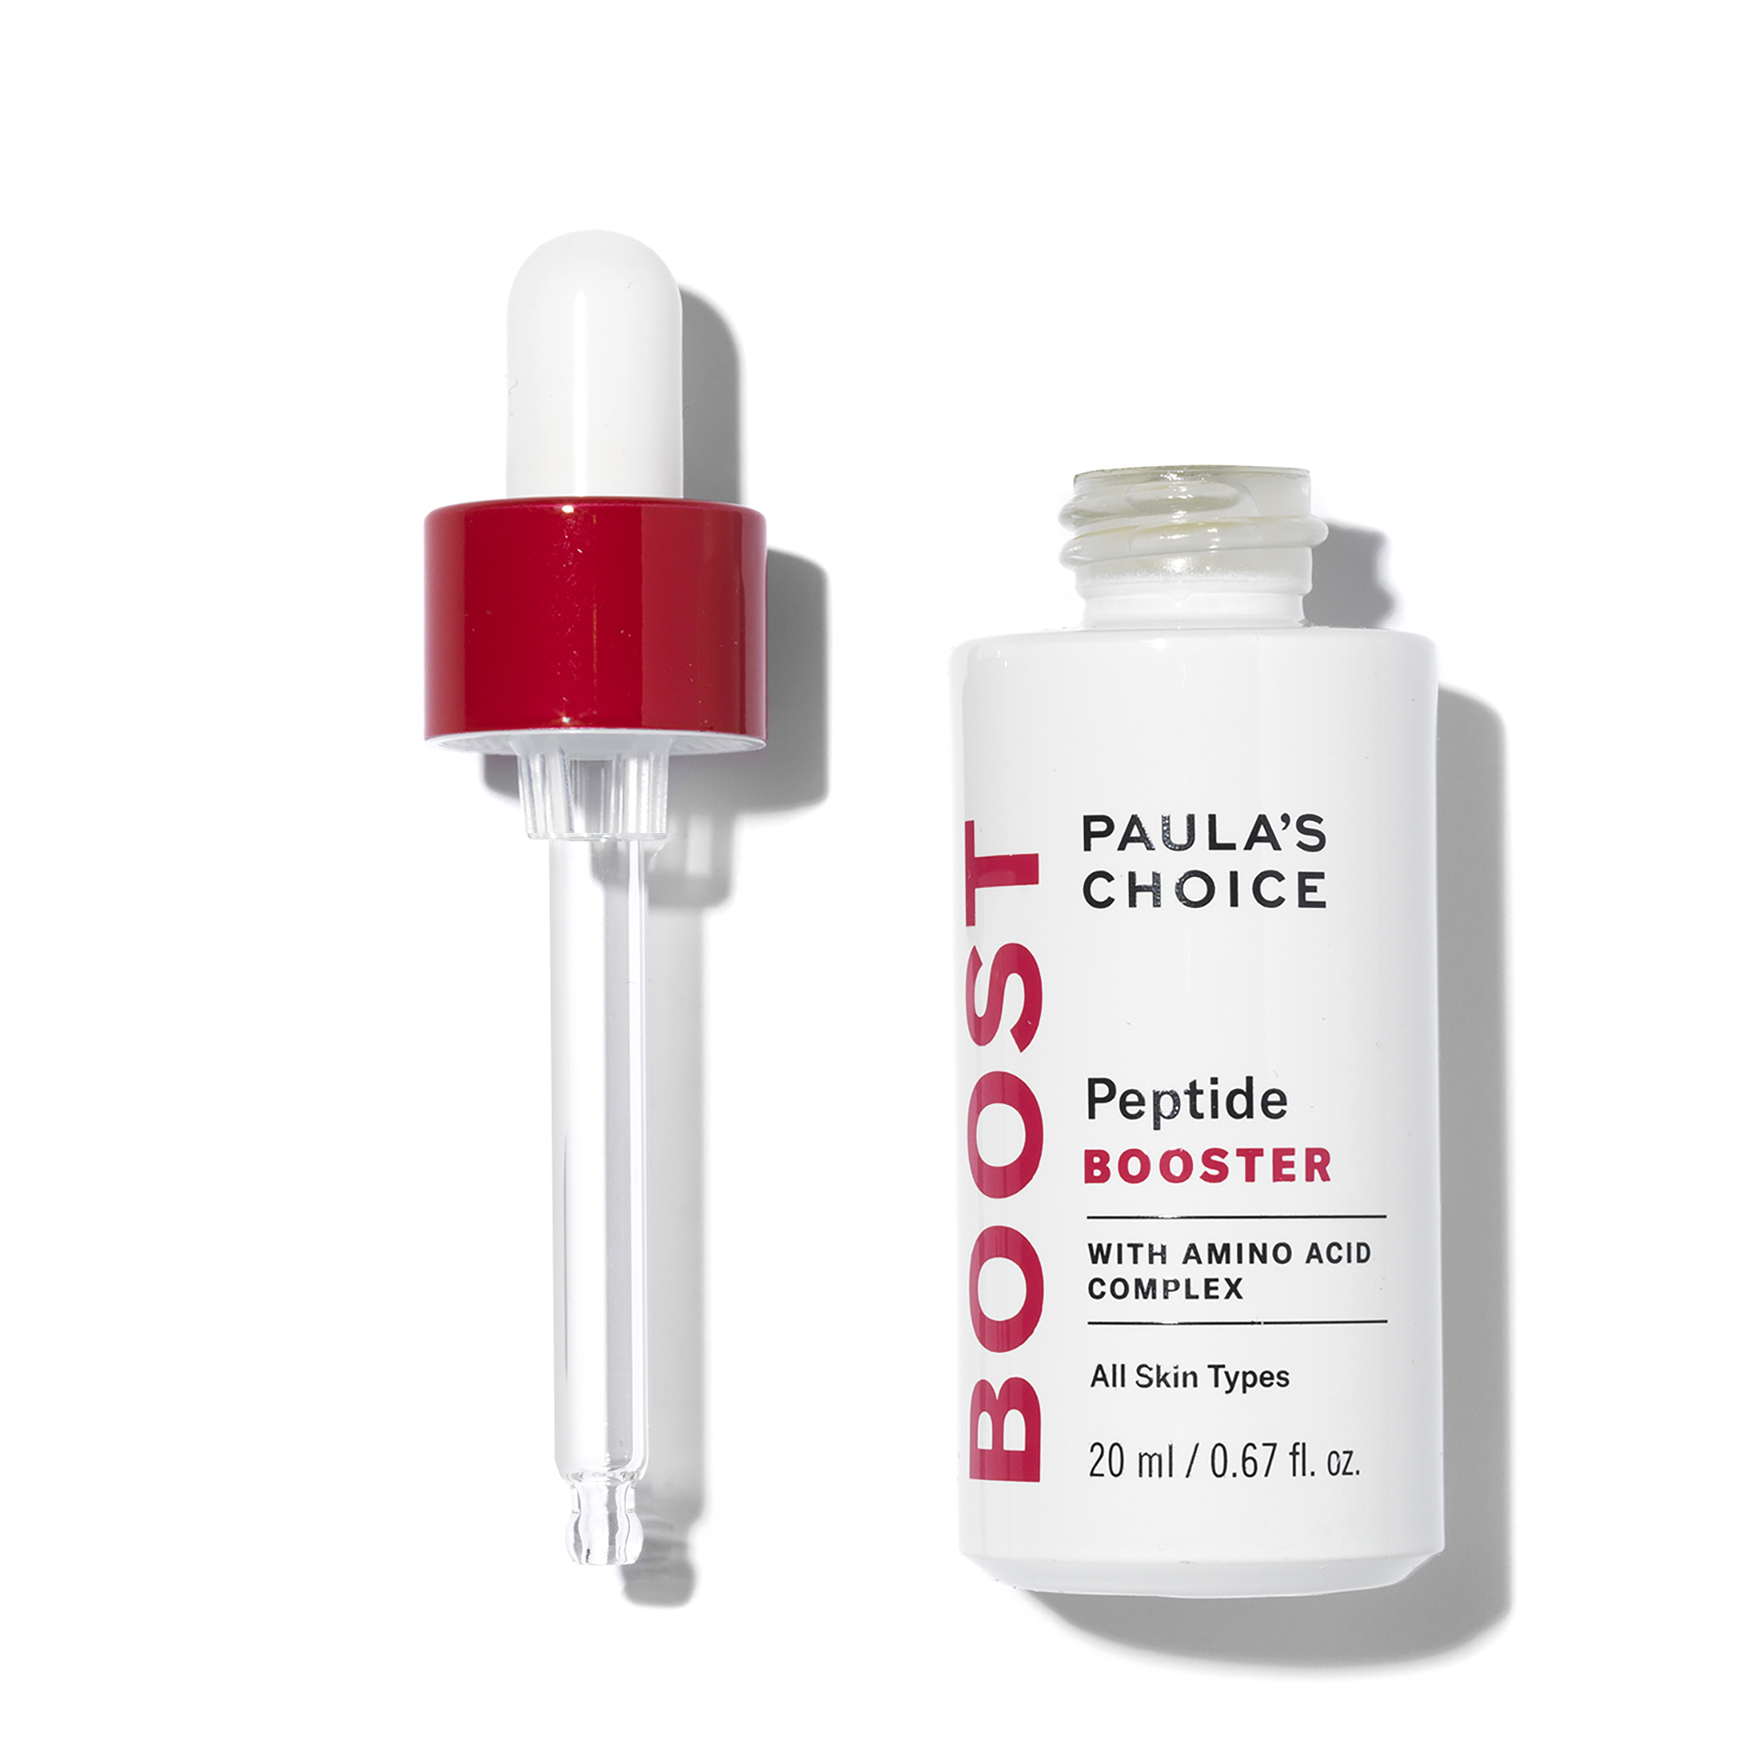 Paula's Choice Peptide Booster | Space NK